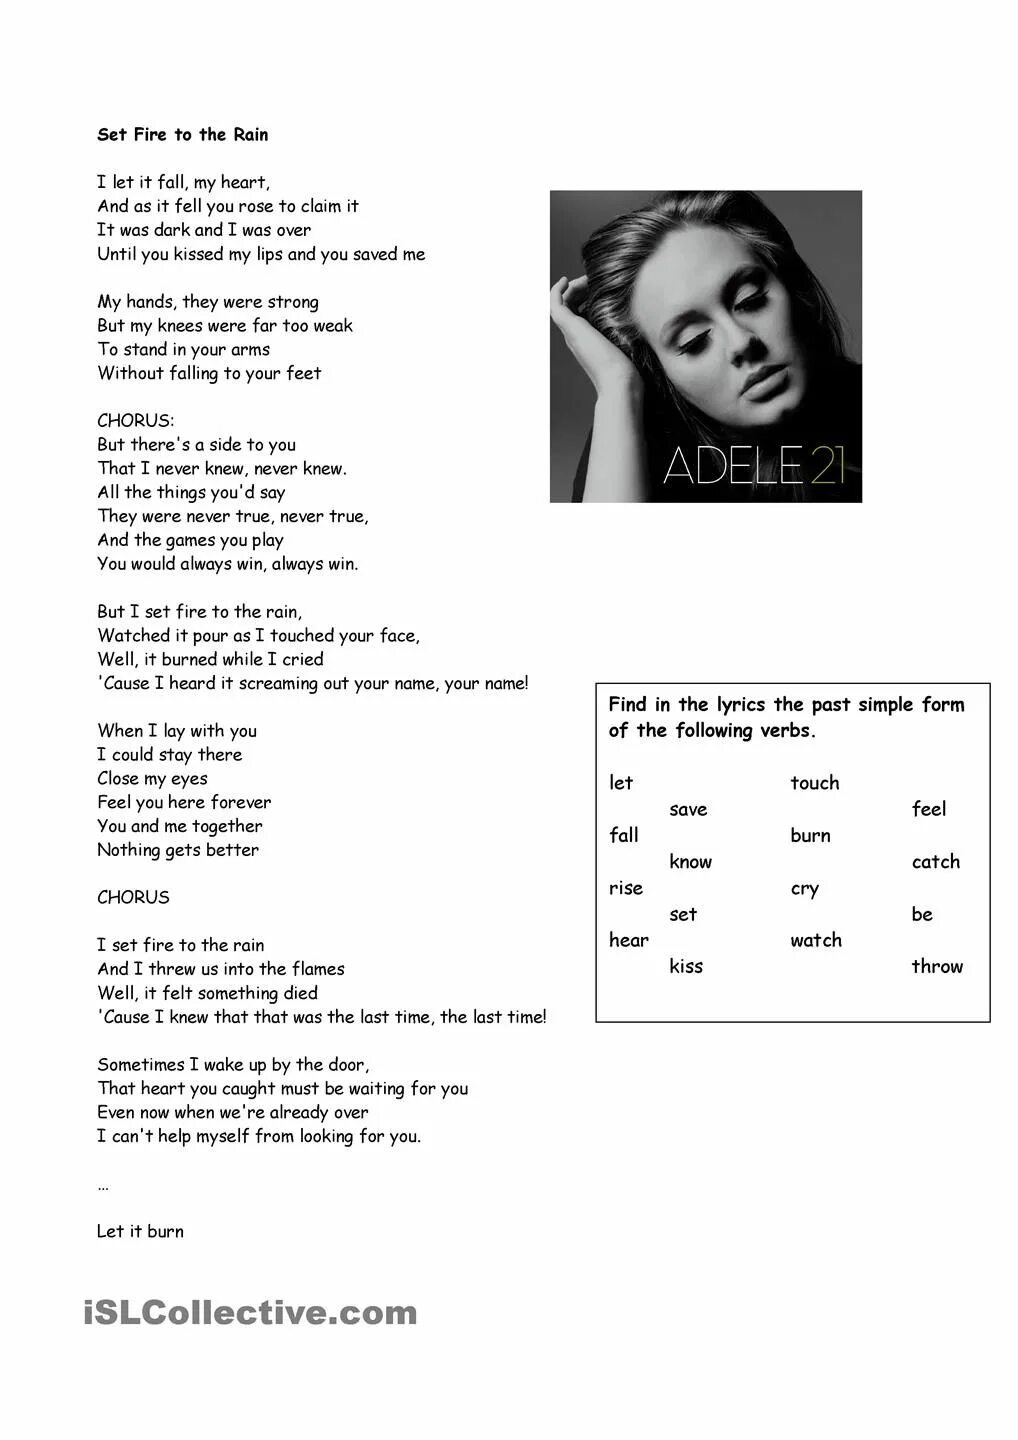 Set Fire to the Rain текст. Adele Set Fire to the Rain текст. Adele hello текст. Song Lyrics Worksheets.